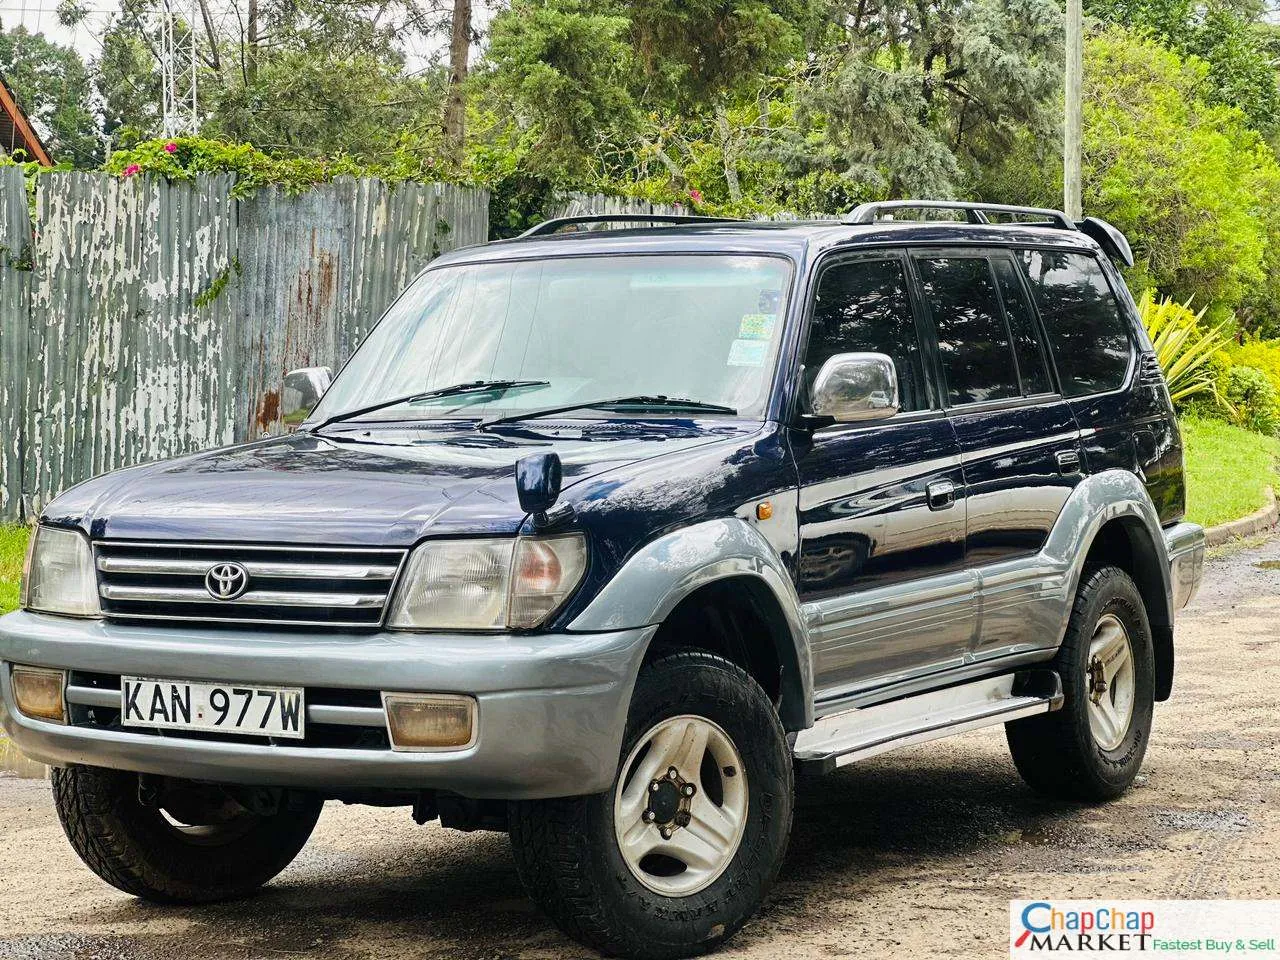 Cars Cars For Sale-Toyota Prado 95 sunroof leather for sale in kenya hire purchase installments You Pay 30% Deposit Trade in OK EXCLUSIVE 9